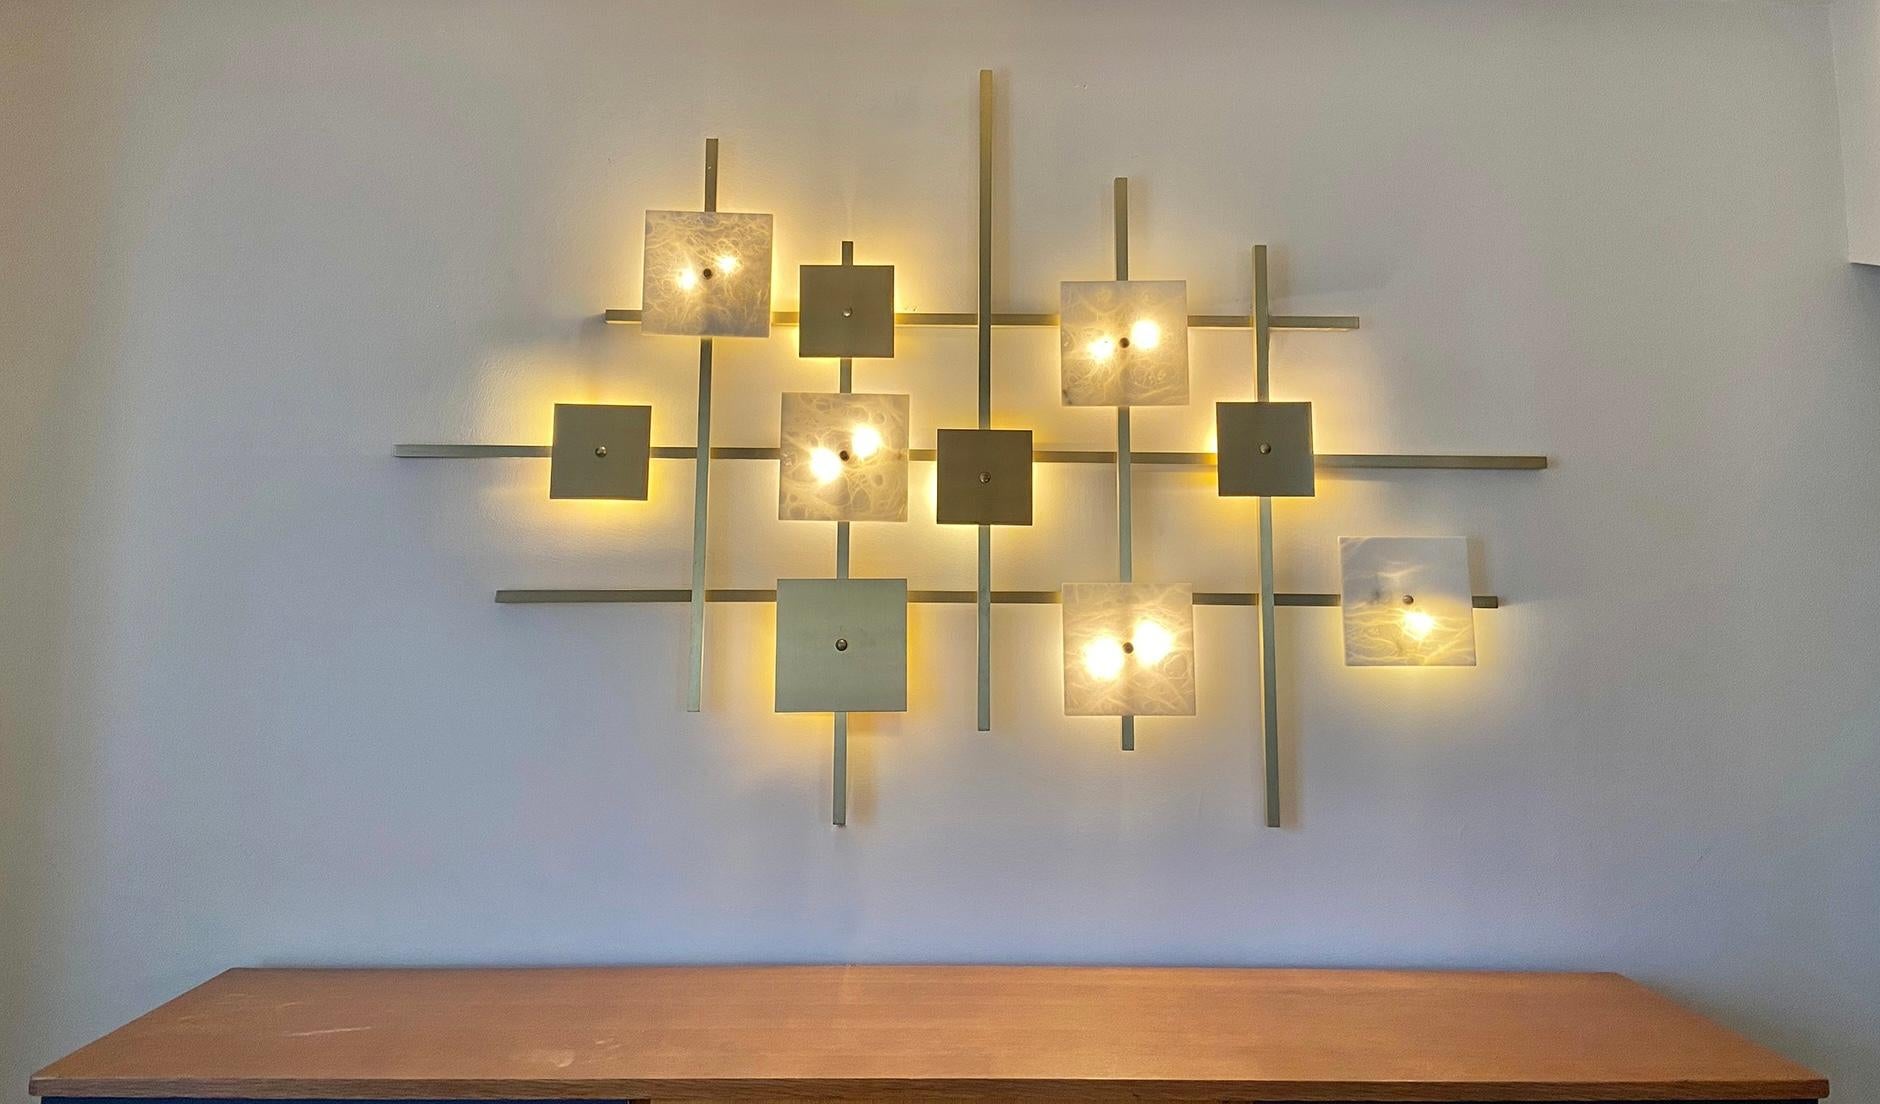 Important wall light in the style of Eric de Dormael in brass and marble Contemporary design 2000.
More than a wall lamp, a sculpture 